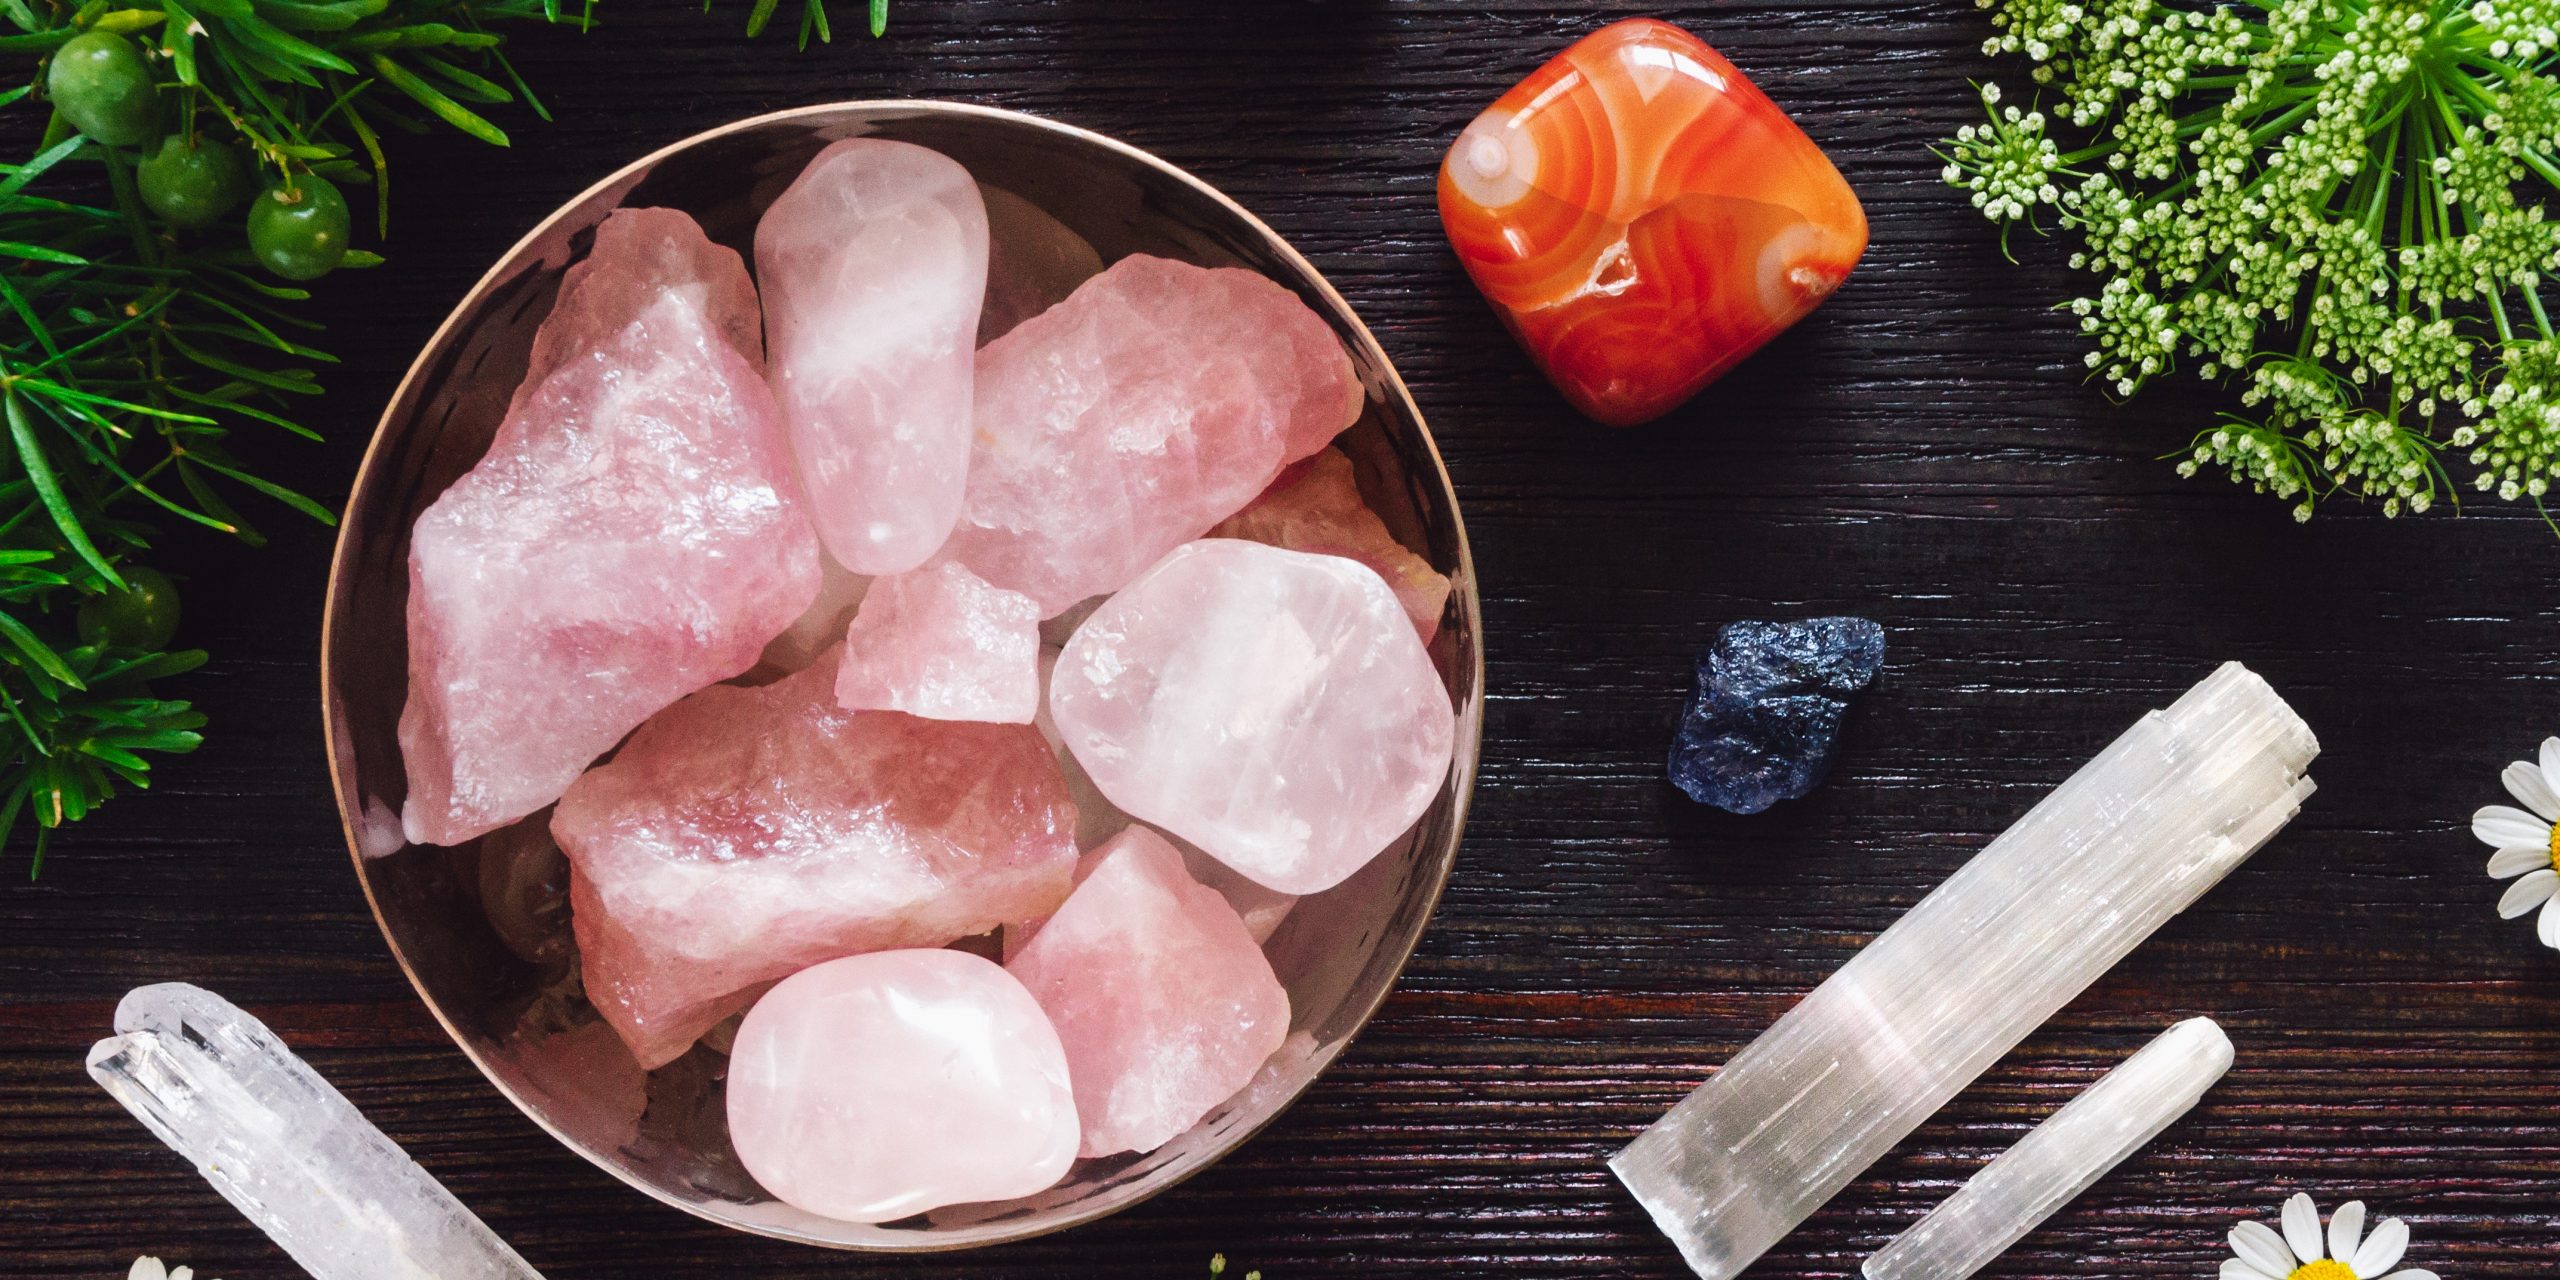 Crystals offer amazing support. Rose quartz especially is good for working with self love and self worth. This image shows rough pieces as well as other stones such as selenite